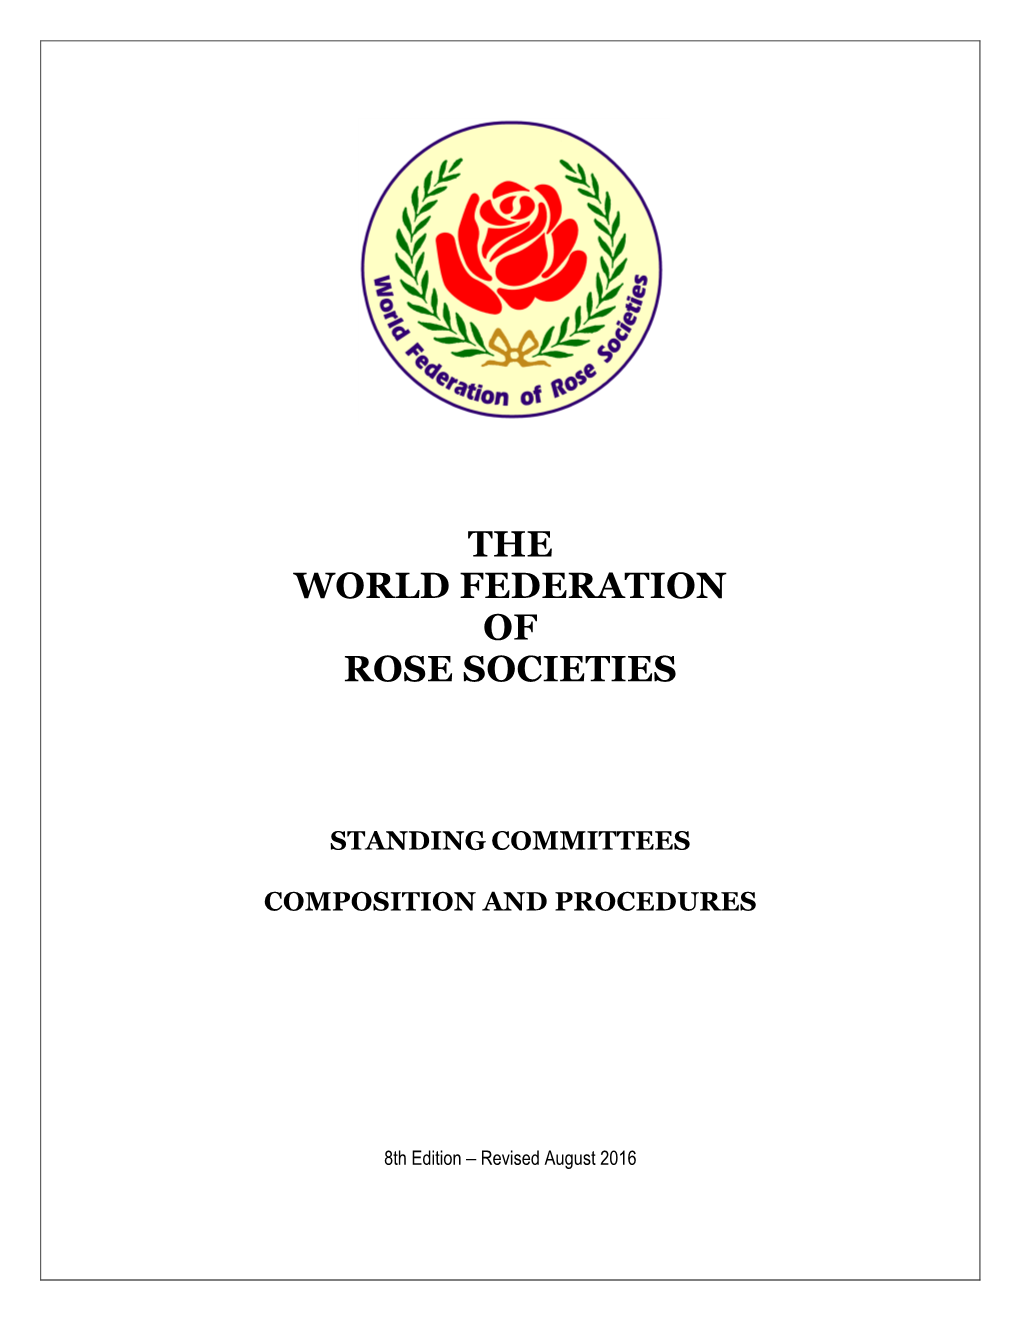 The World Federation of Rose Societies Standing Committees Composition and Procedures